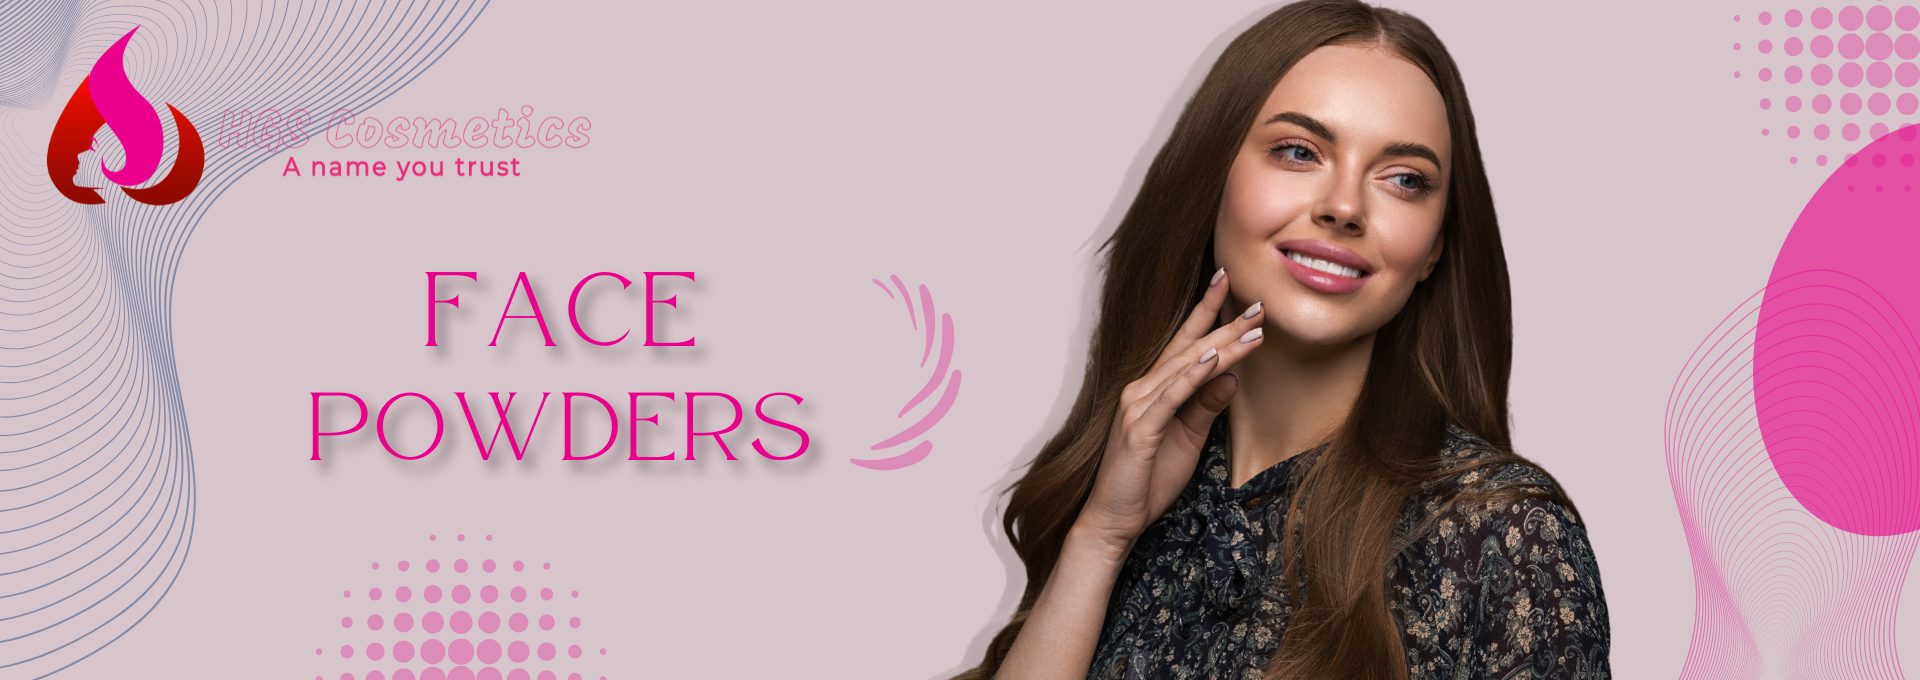 Shop Best Face Powders products Online @ HGS Cosmetics